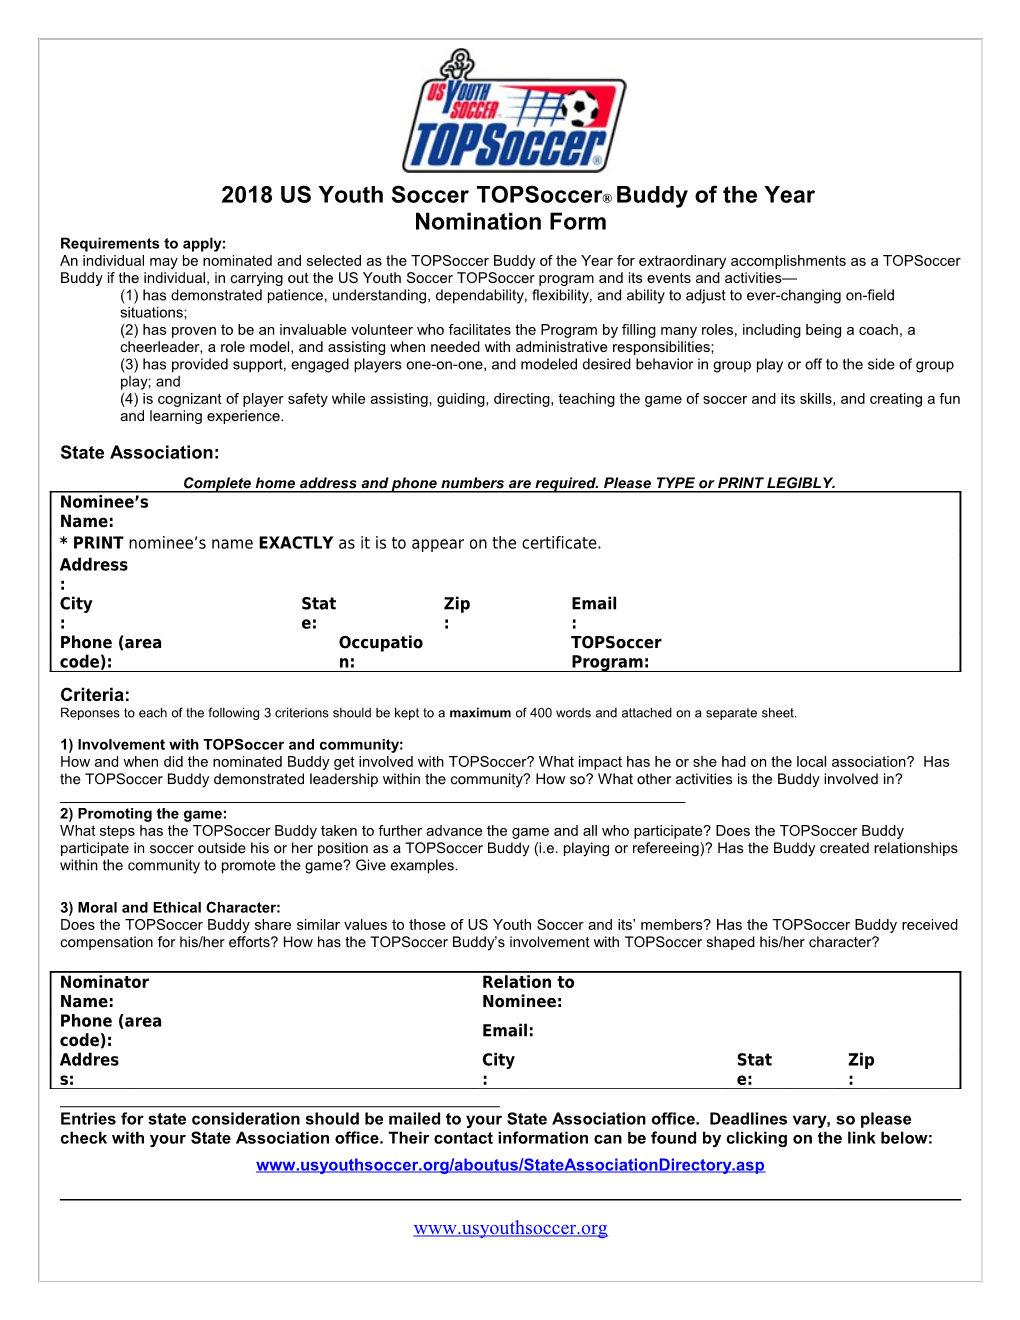 2018 US Youth Soccertopsoccer Buddy of the Year